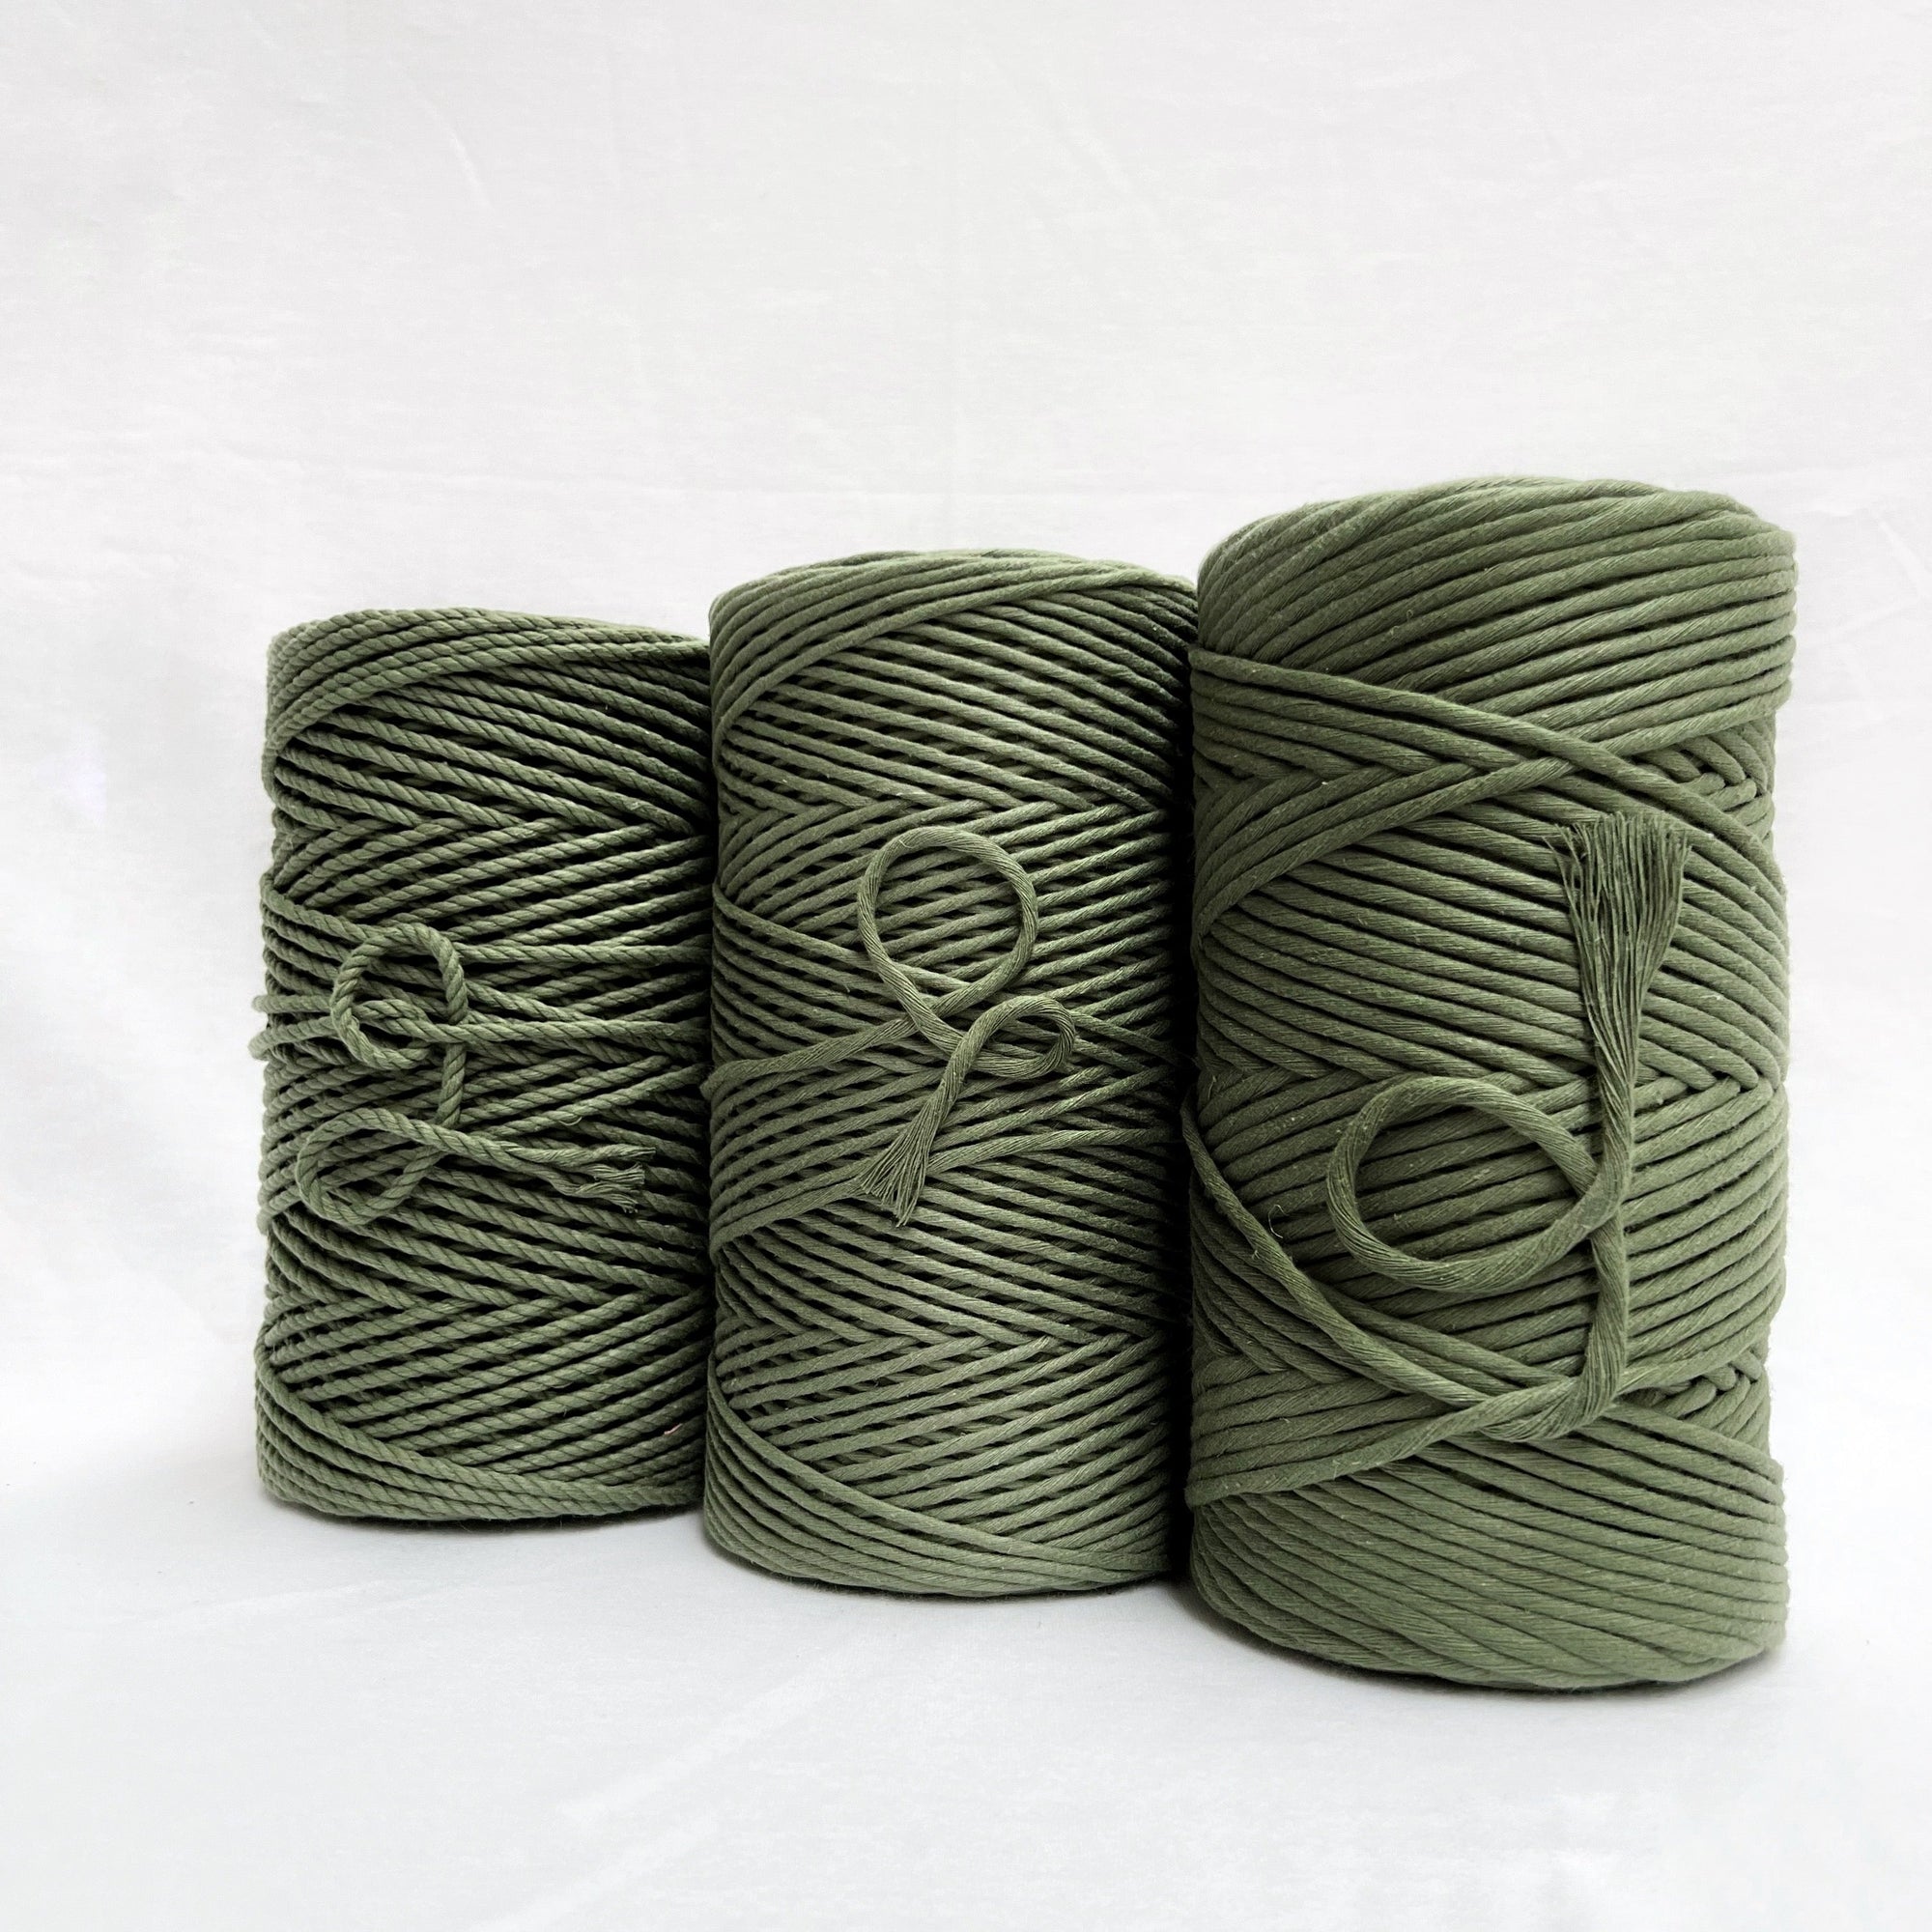 Mary Maker Studio Recycled Luxe Macrame String // Forest macrame cotton macrame rope macrame workshop macrame patterns macrame